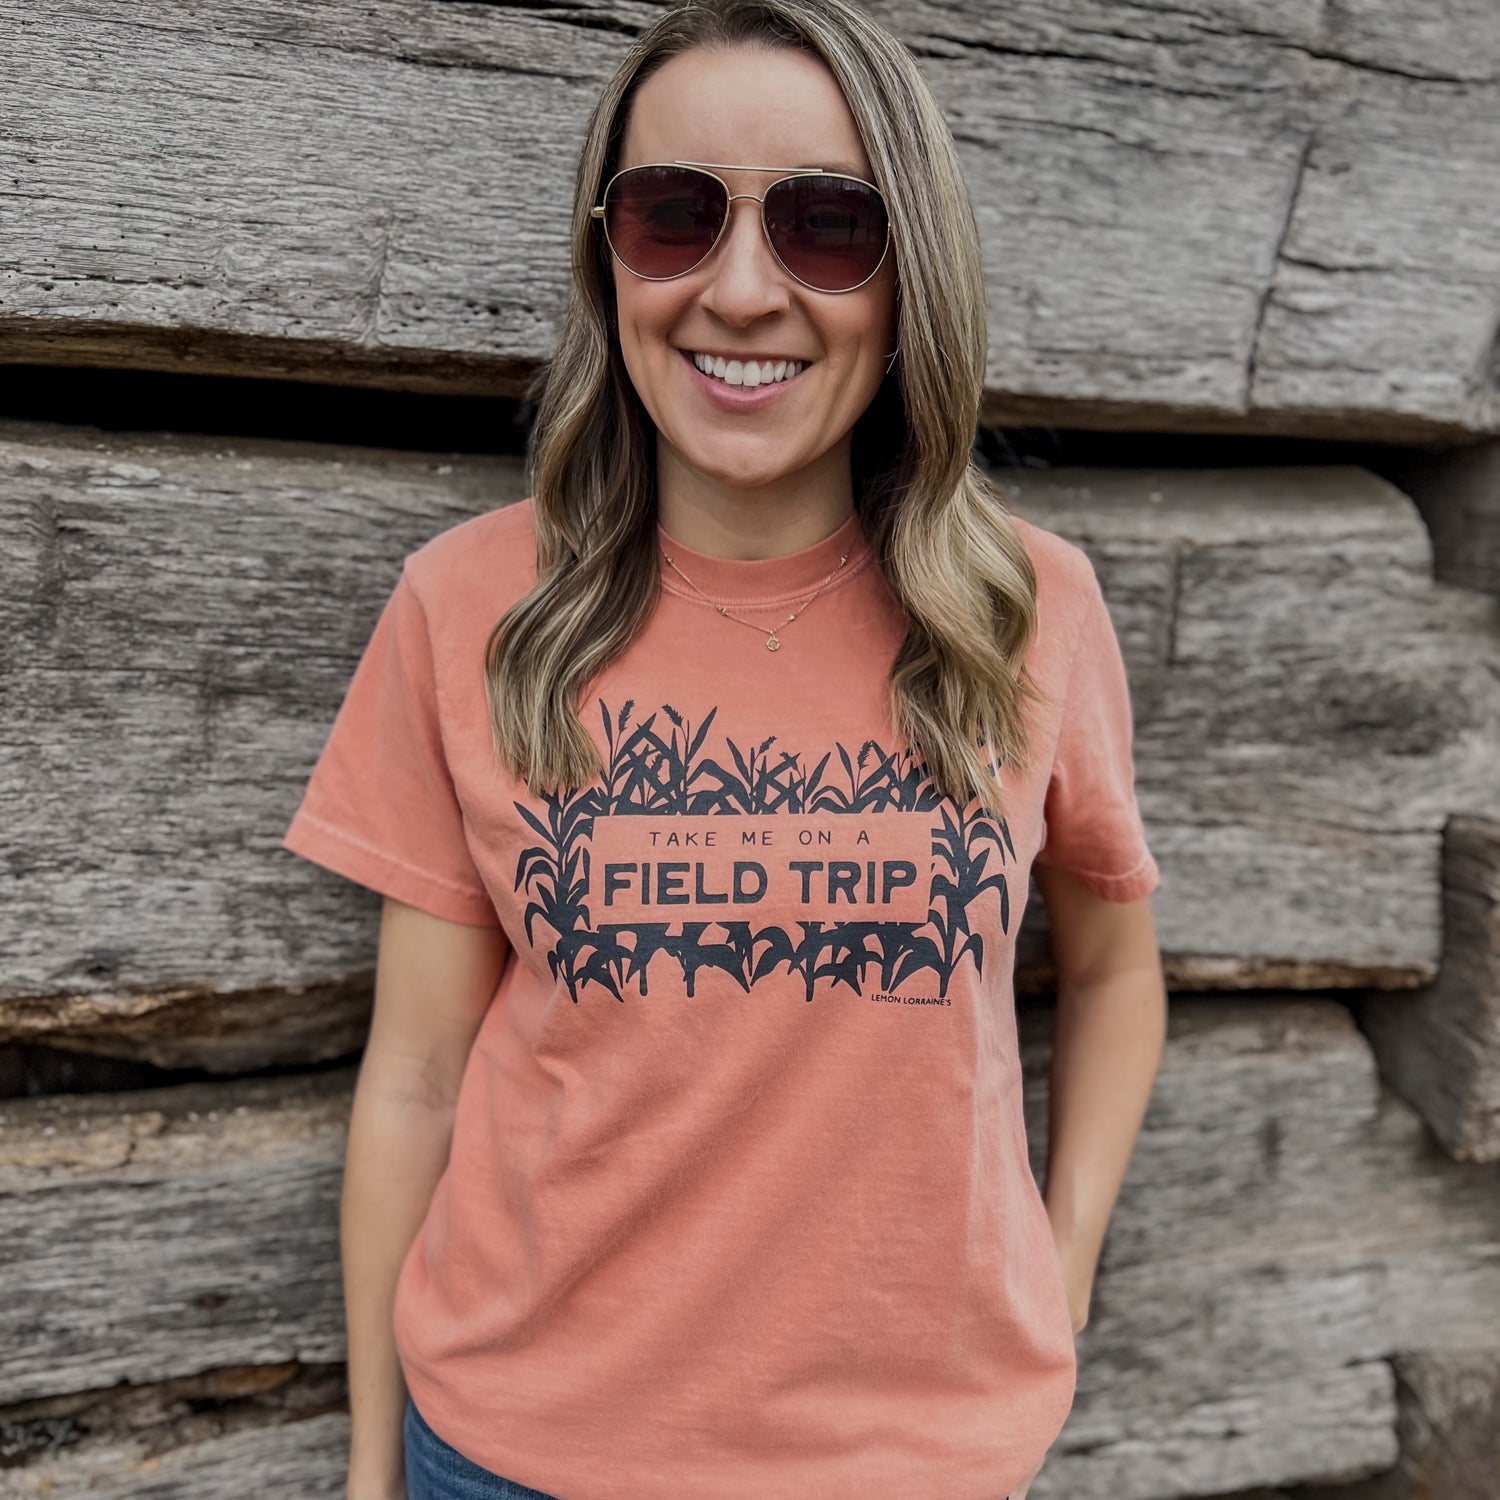 TAKE ME ON A FIELD TRIP - Comfort Color Tee